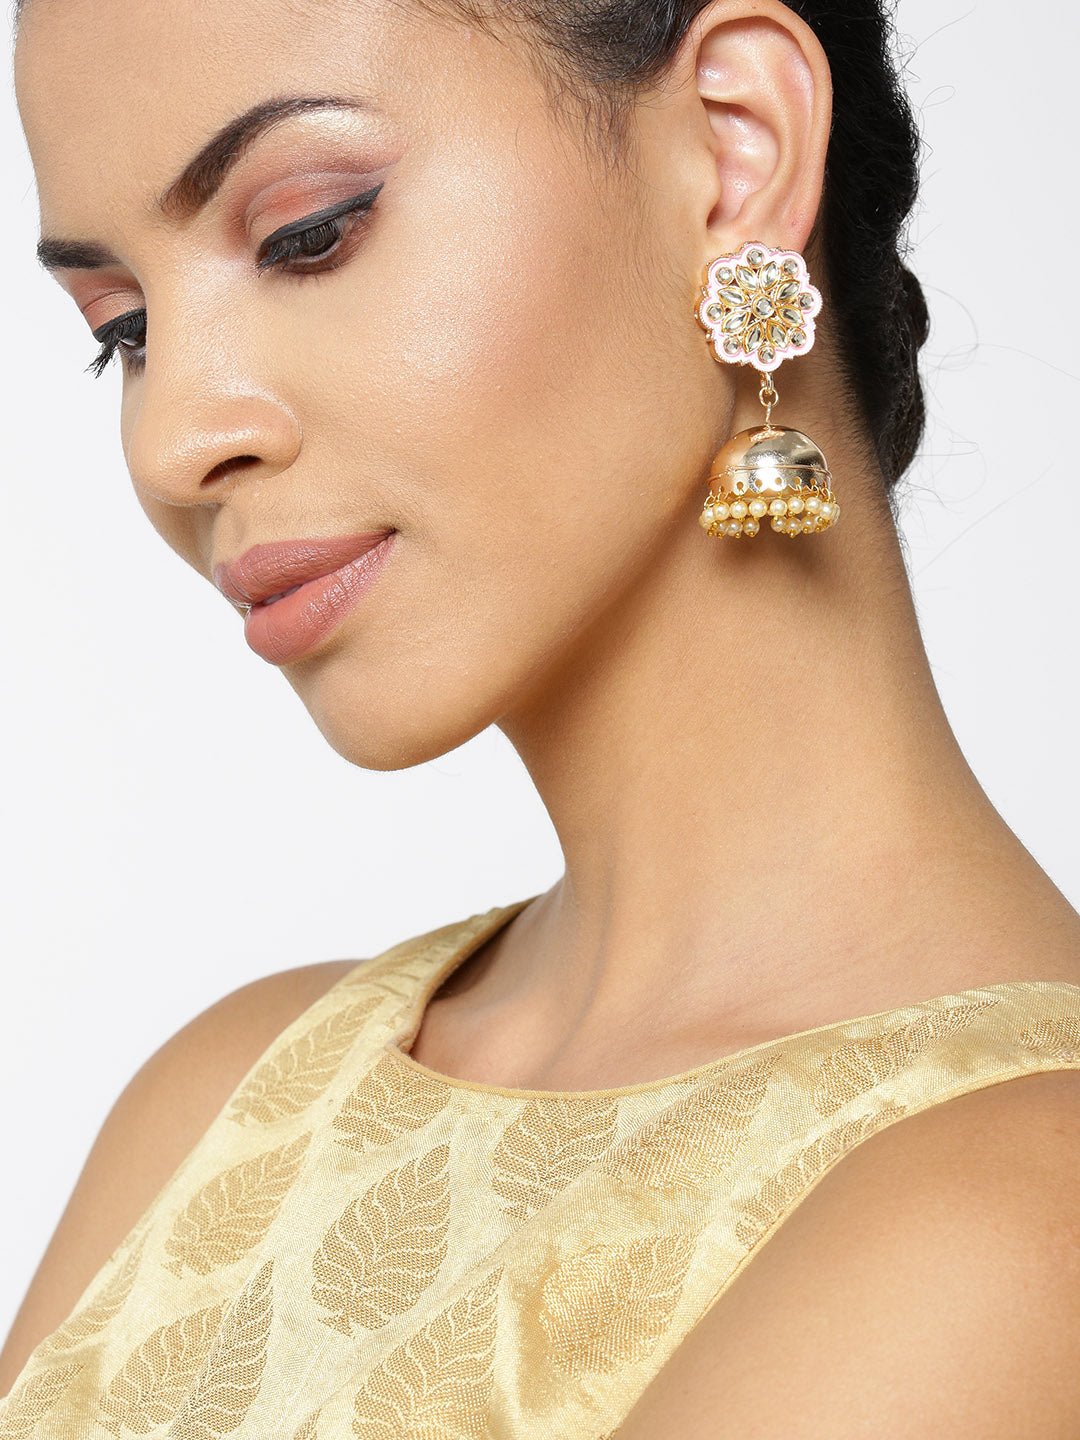 Gold-Plated Kundan Studded Floral Patterned Meenakari Jhumka Earrings in Pink Color with Pearls Drop